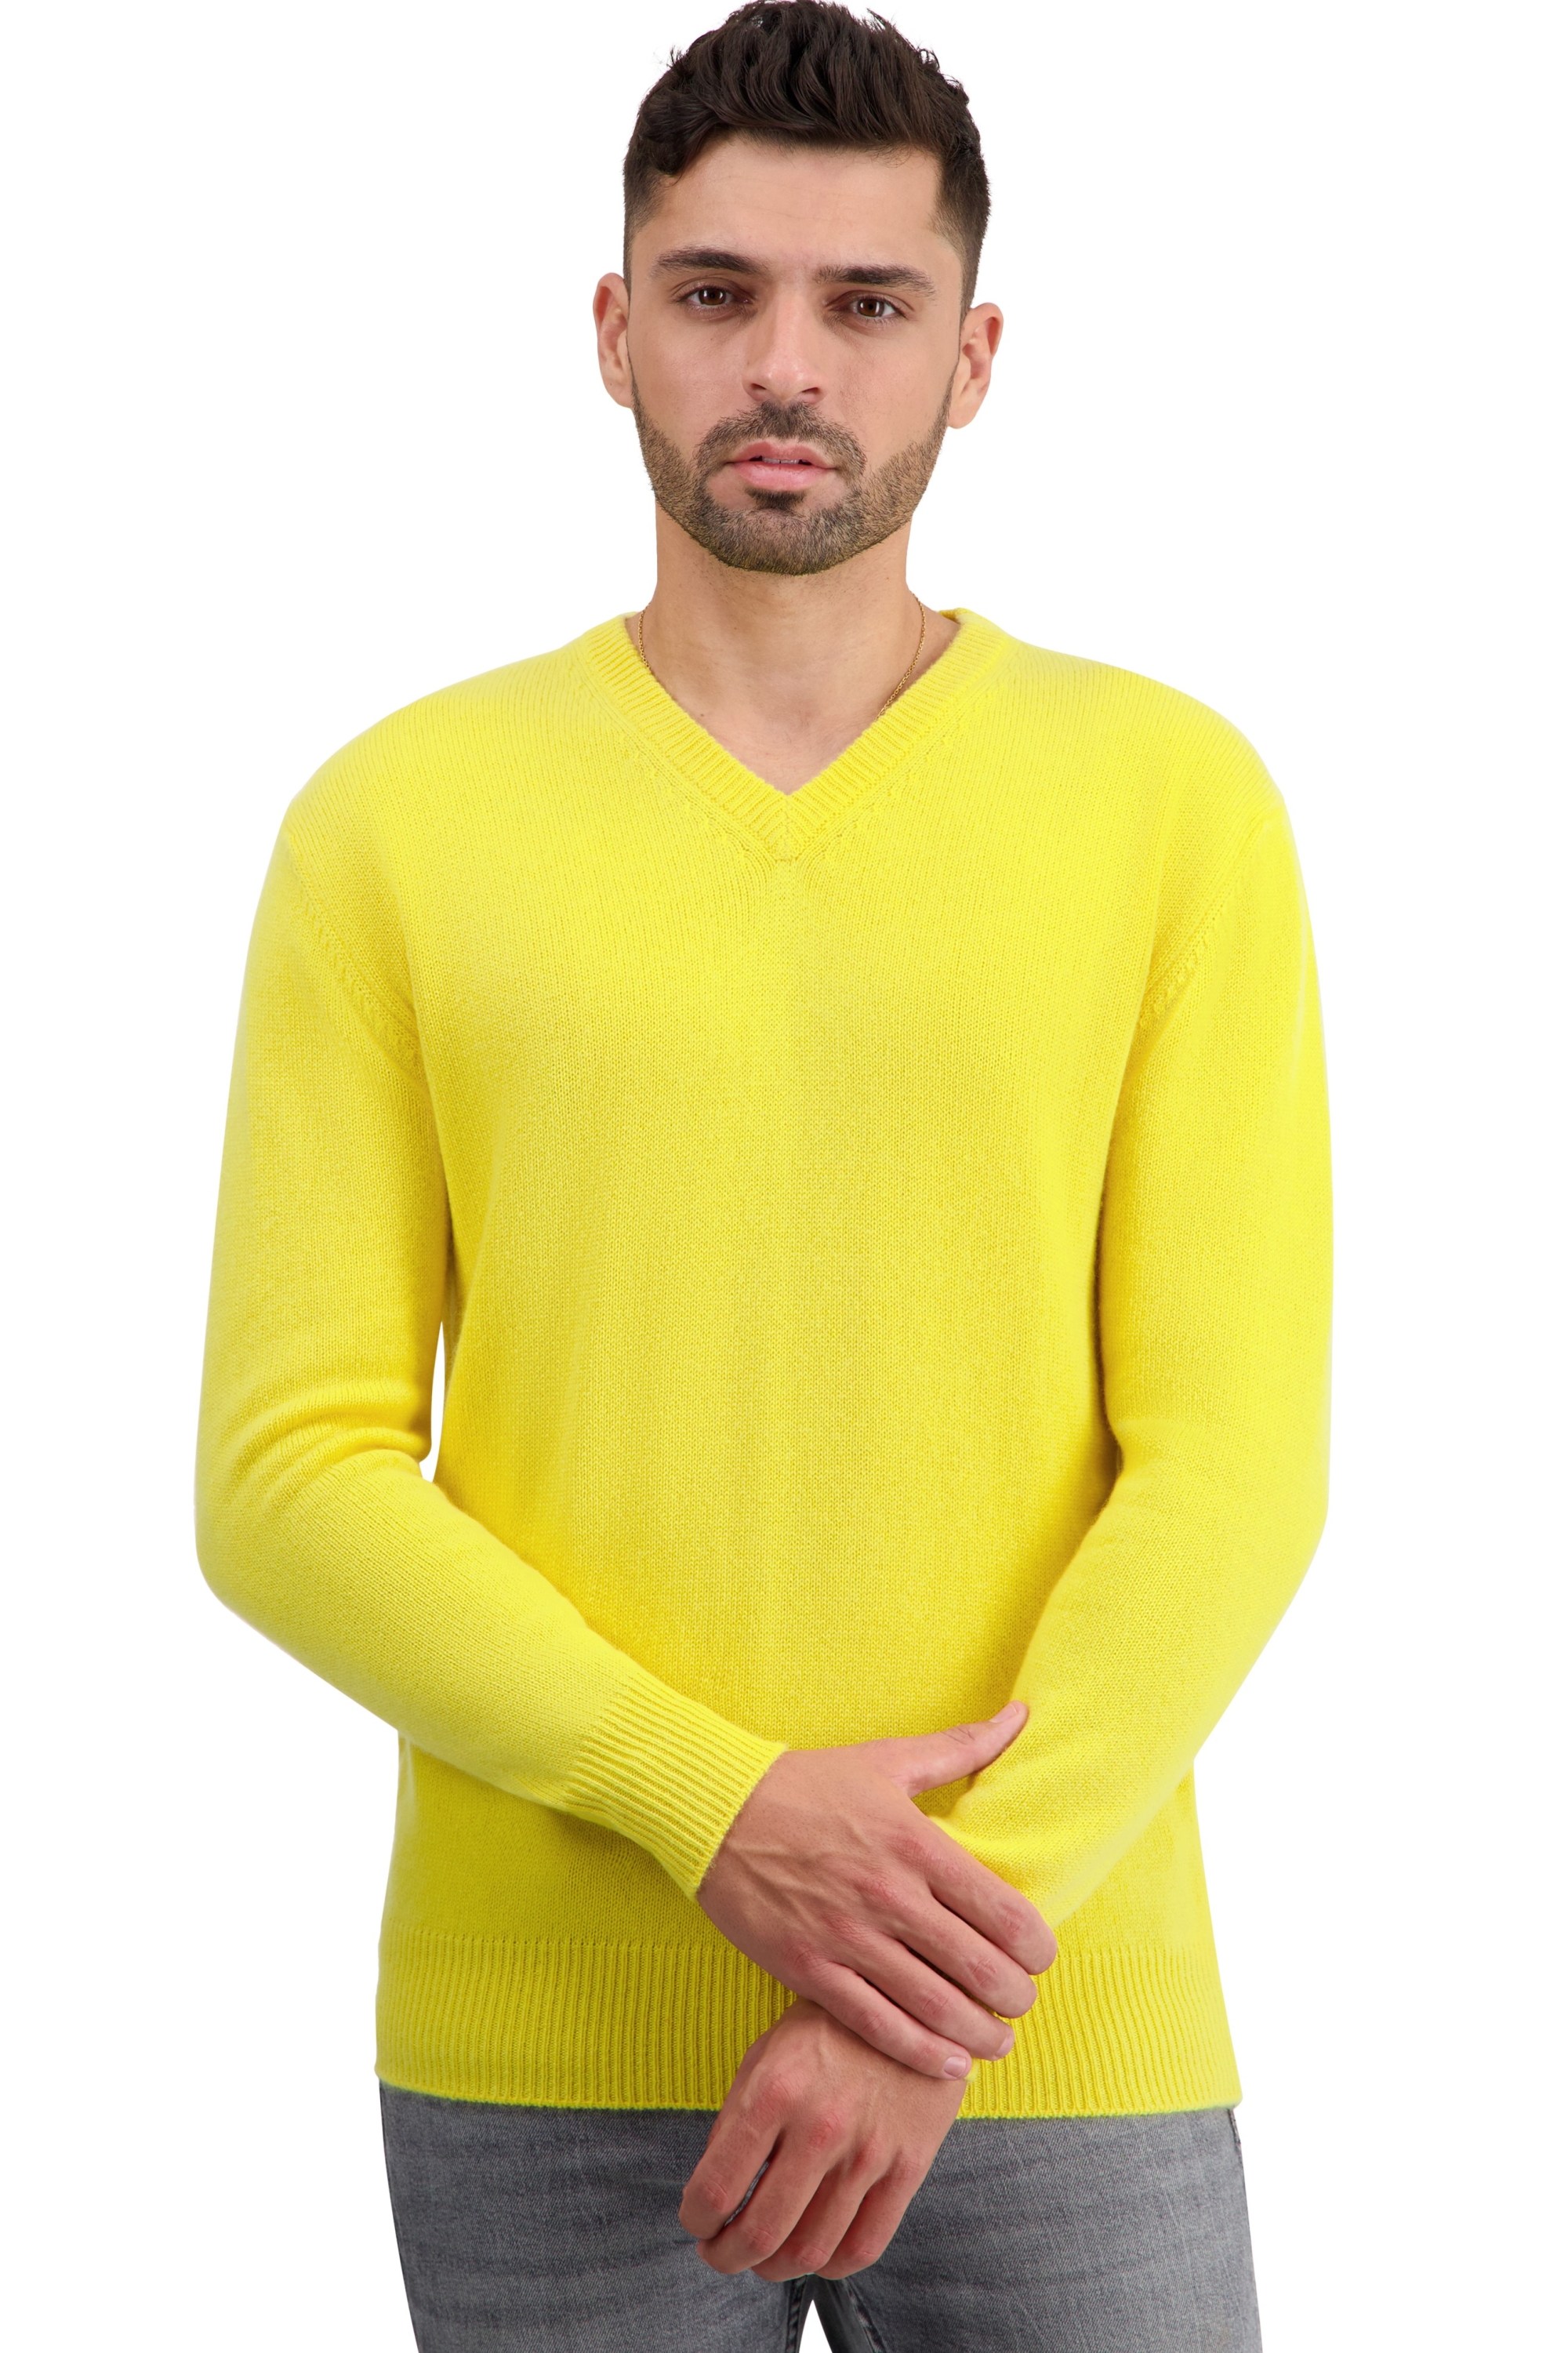 Cashmere men low prices tour first daffodil m